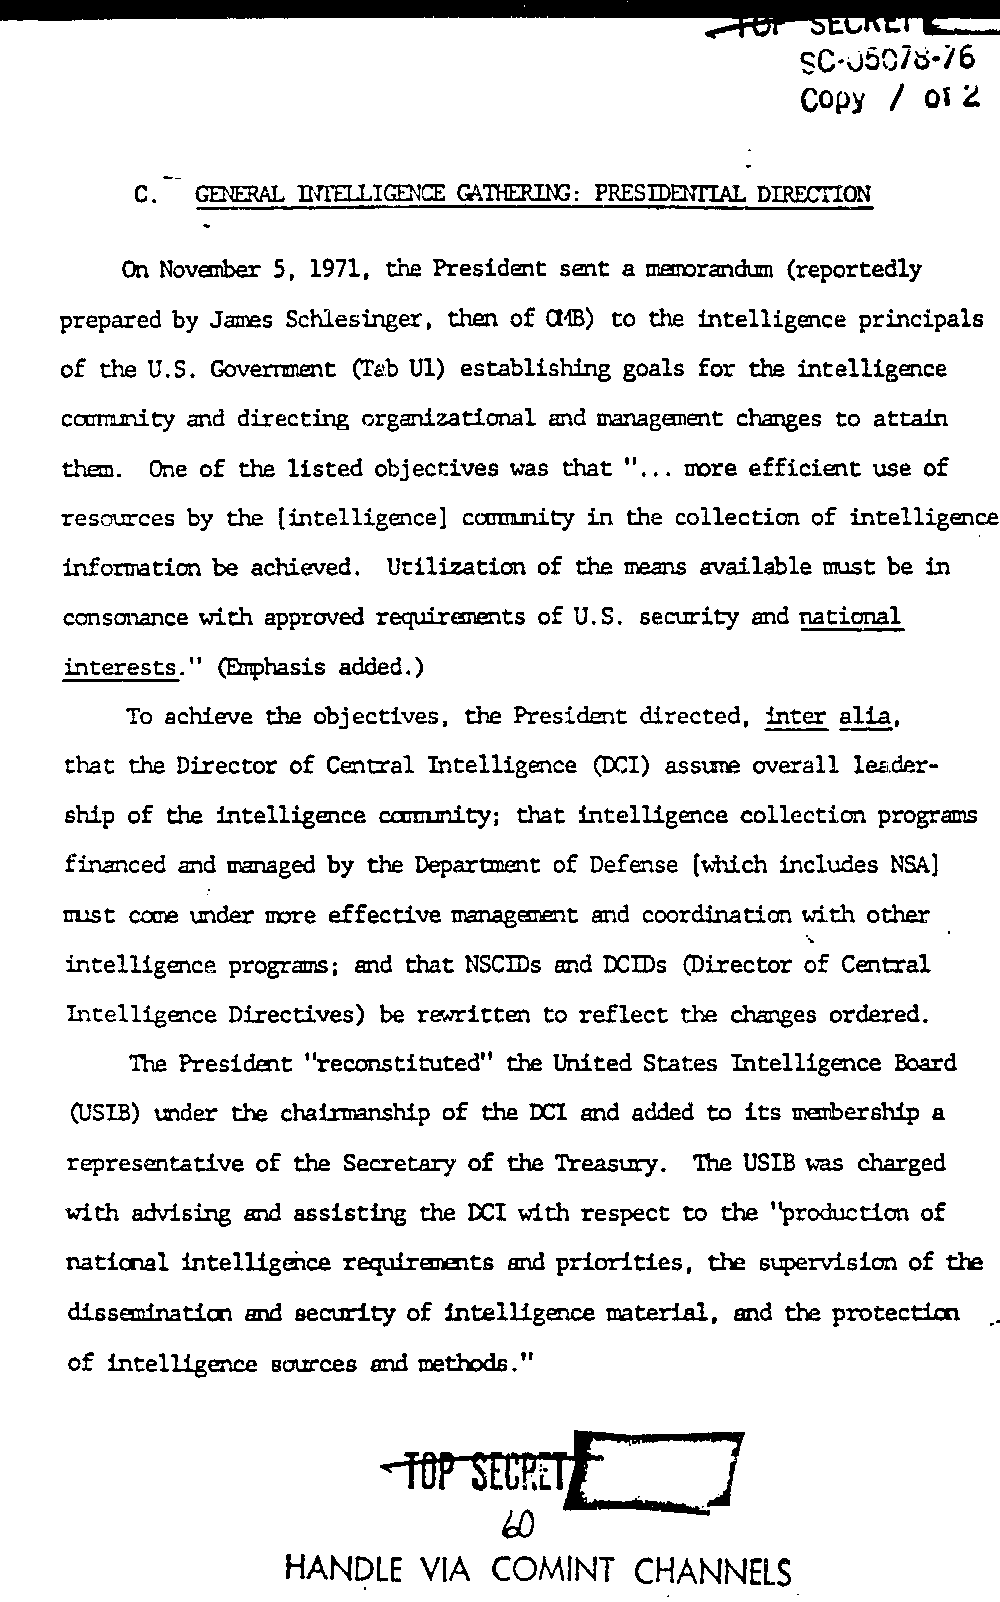 Page 68 from Report on Inquiry Into CIA Related Electronic Surveillance Activities